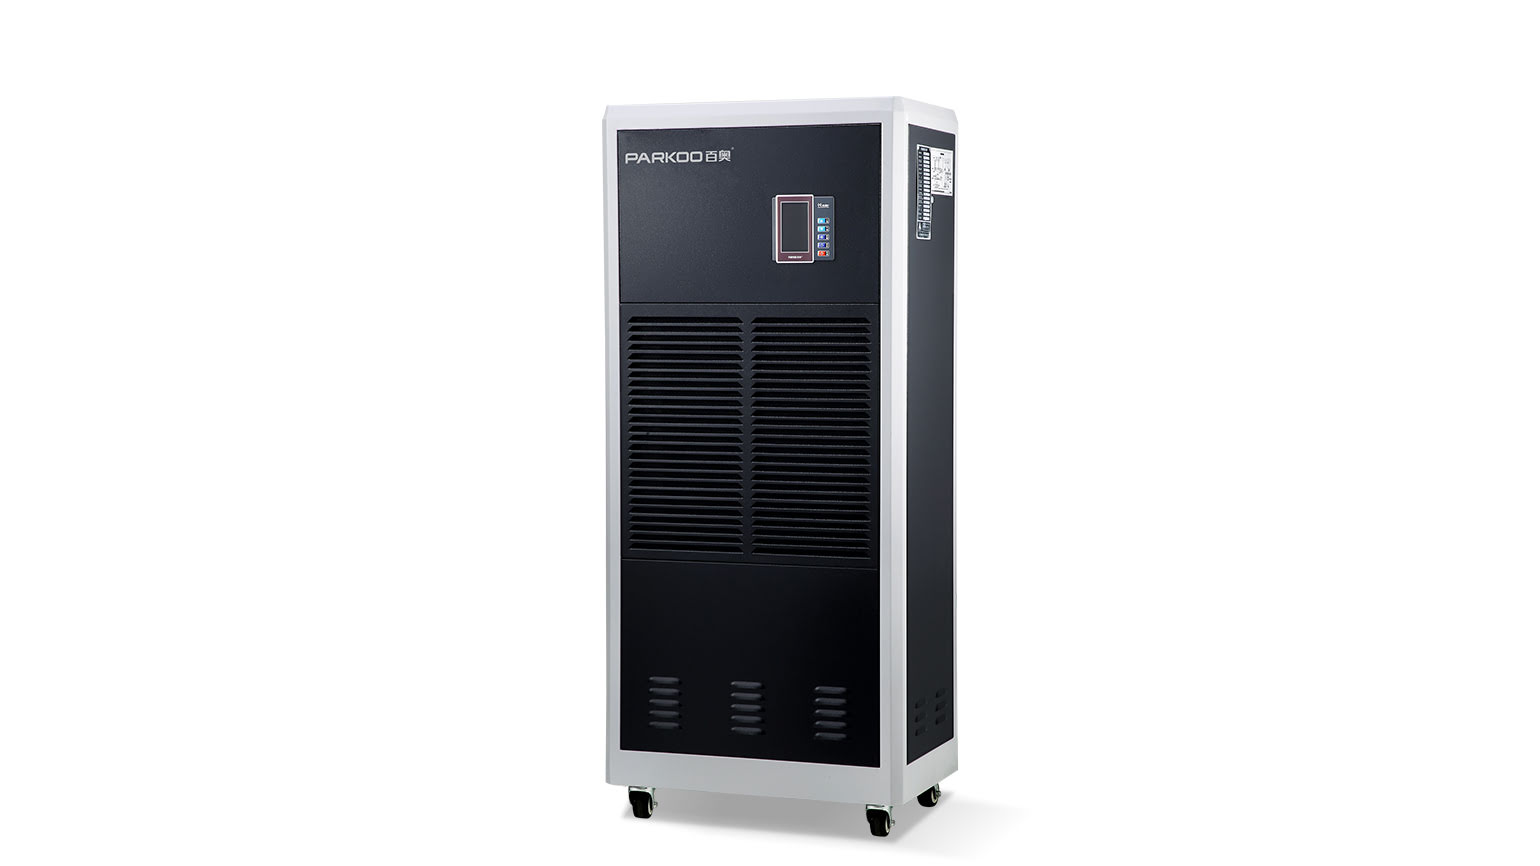 The role and use of industrial dehumidifiers